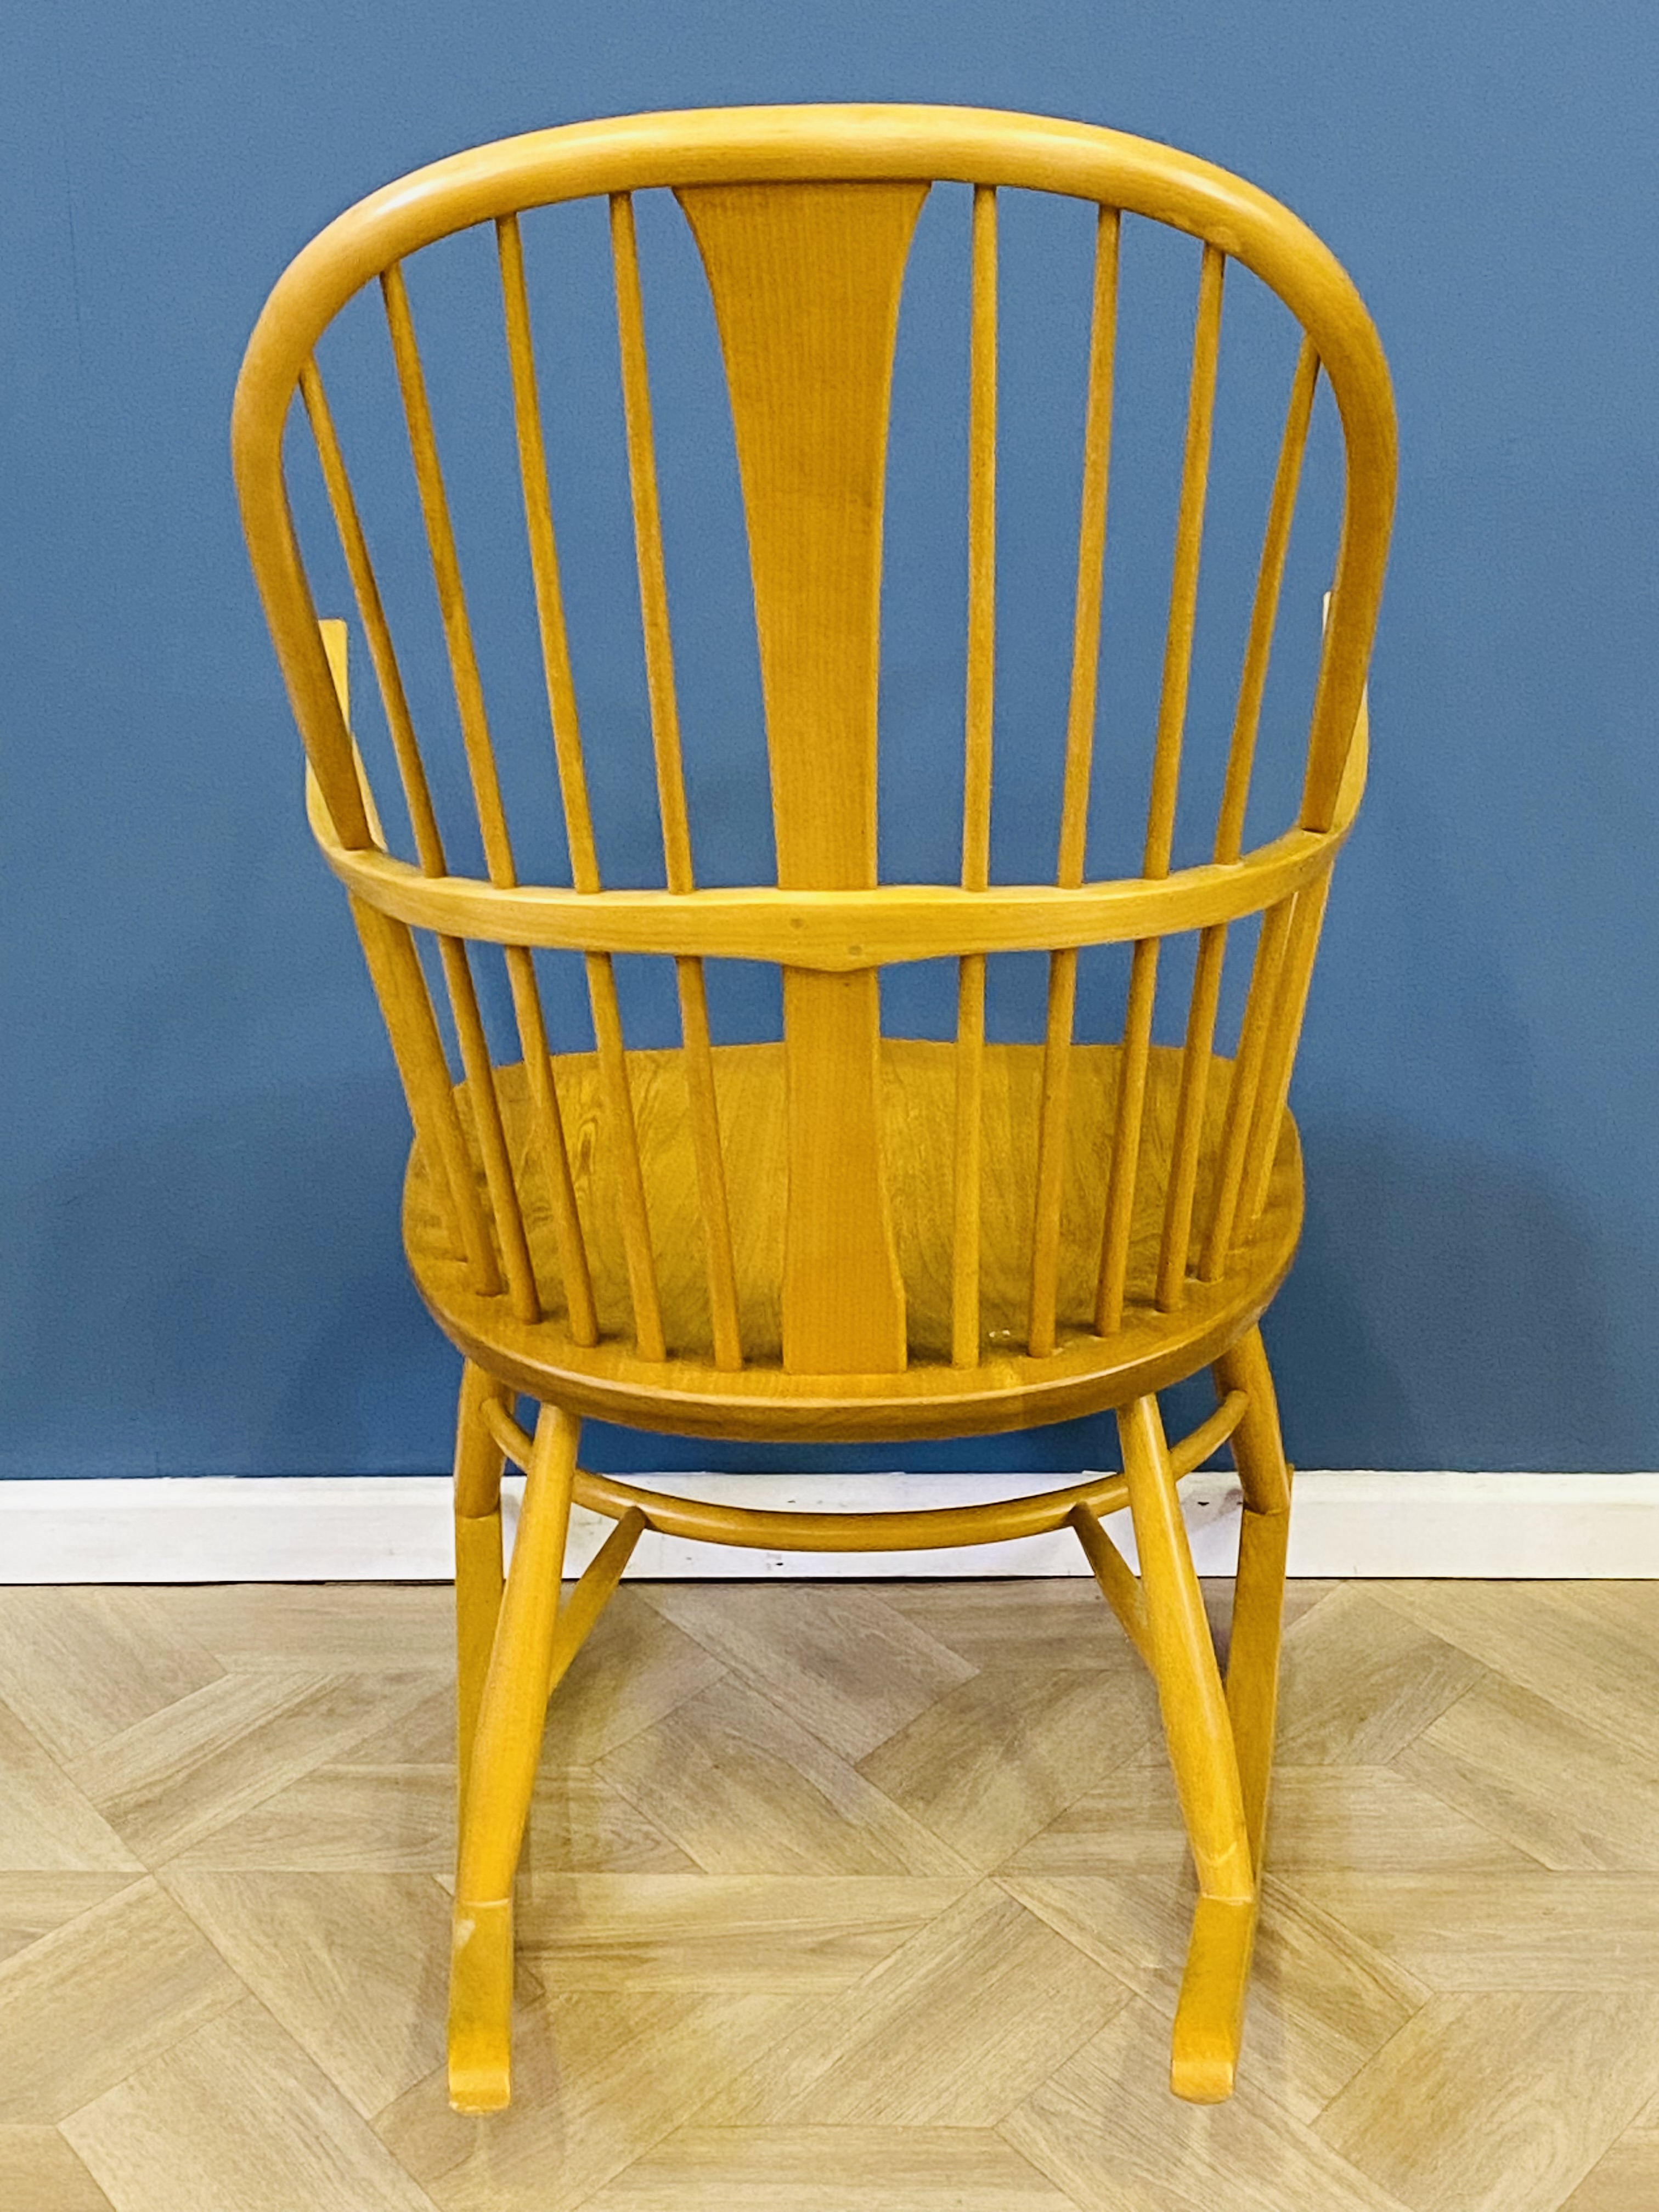 Ercol stick back rocking chair - Image 3 of 7